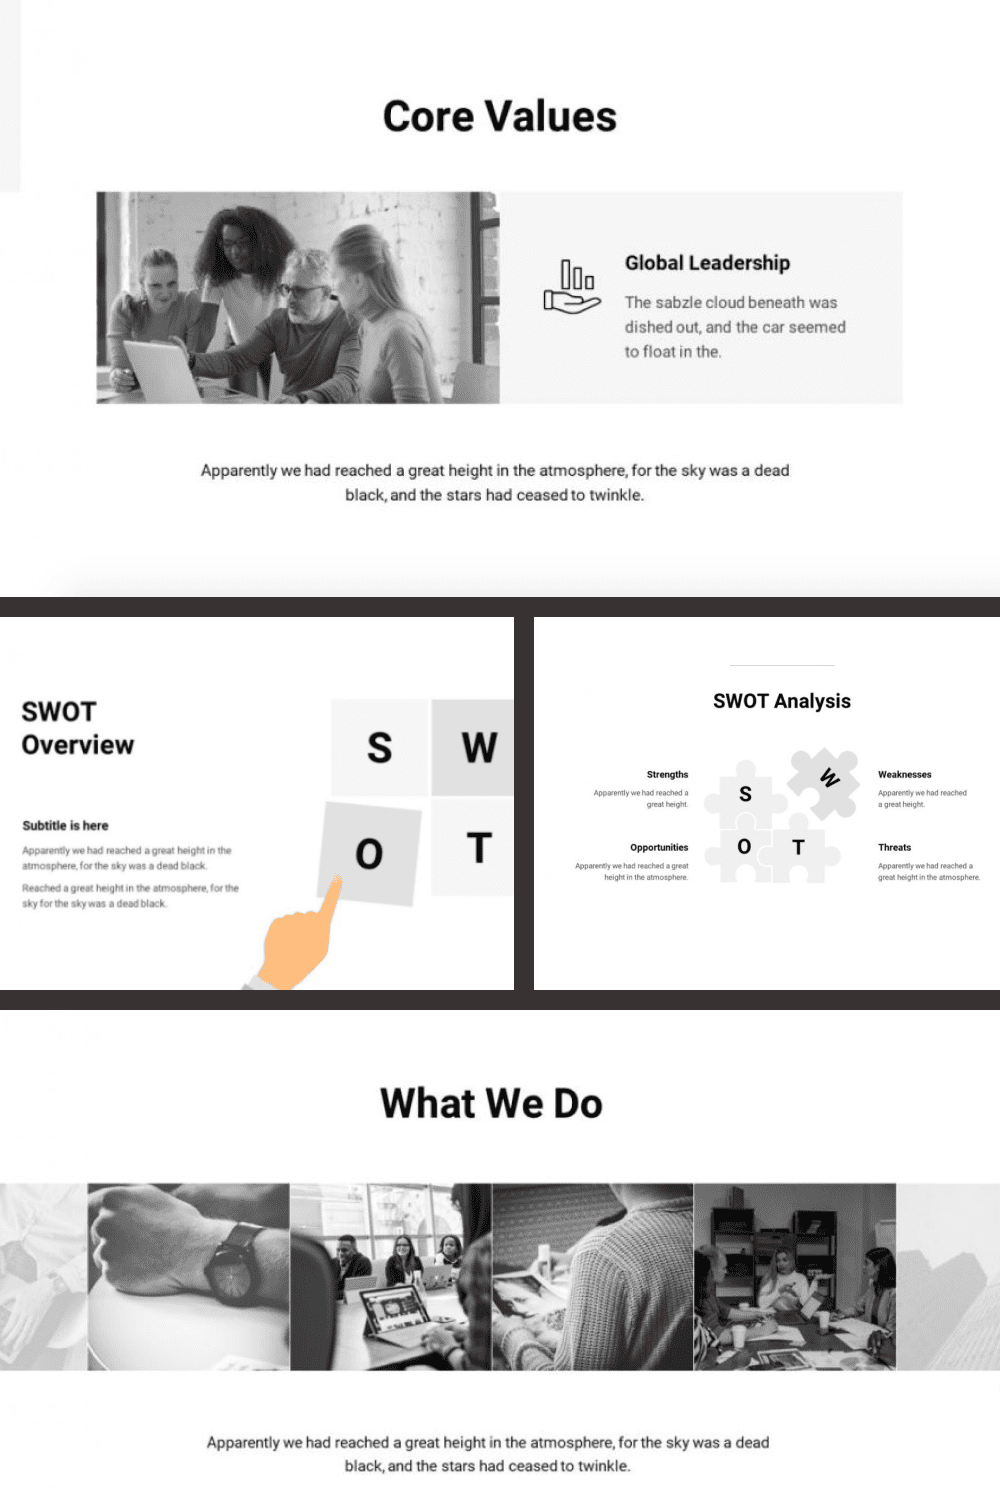 Annual Report - Animated Template - MasterBundles - Pinterest Collage Image.